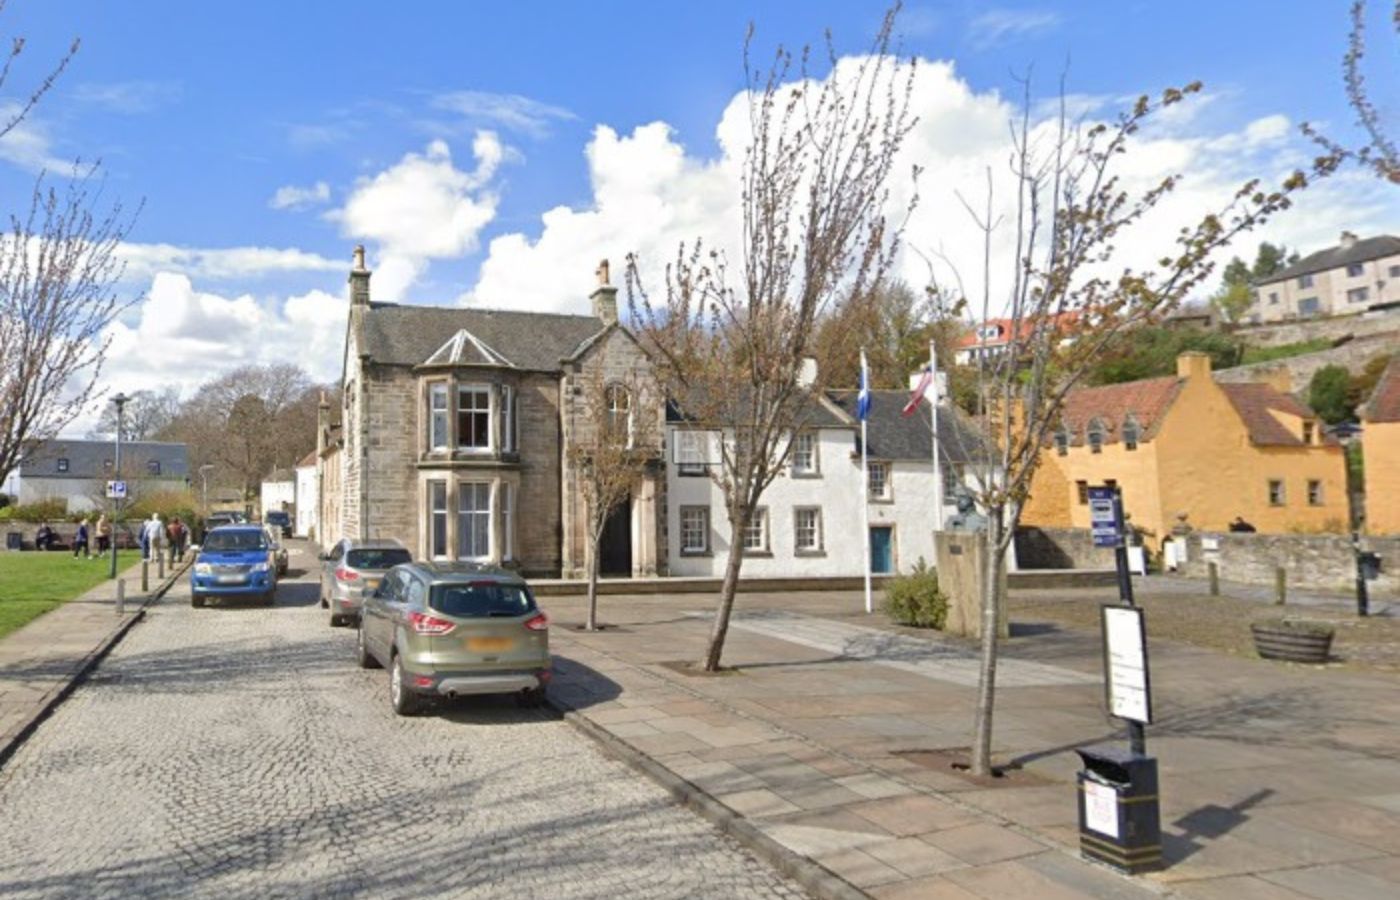 The village of Culross will see new parking restrictions.